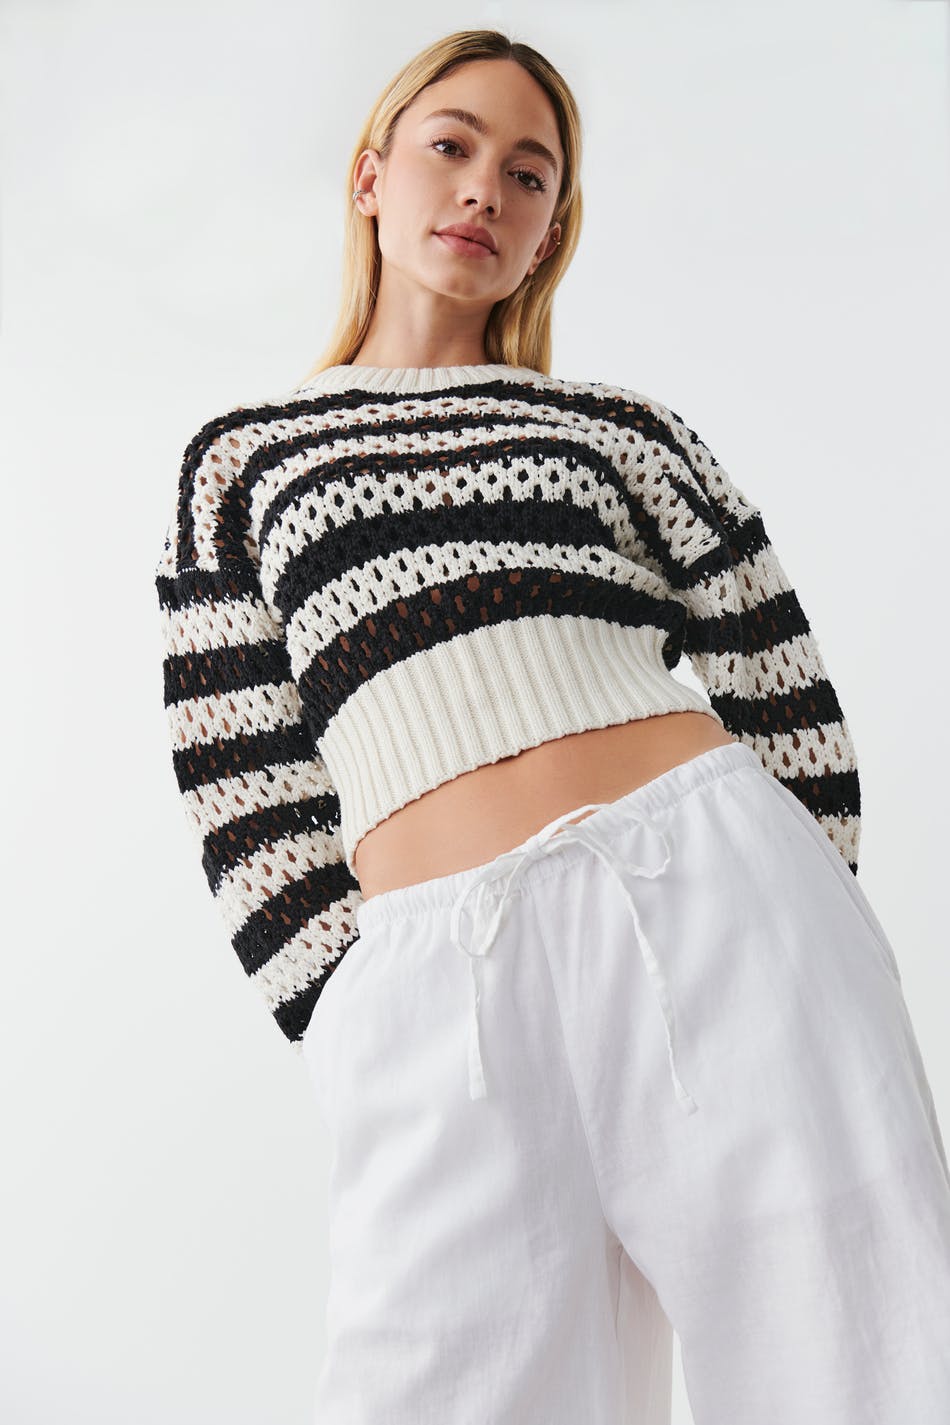 ginatricot.com | Knitted sweater